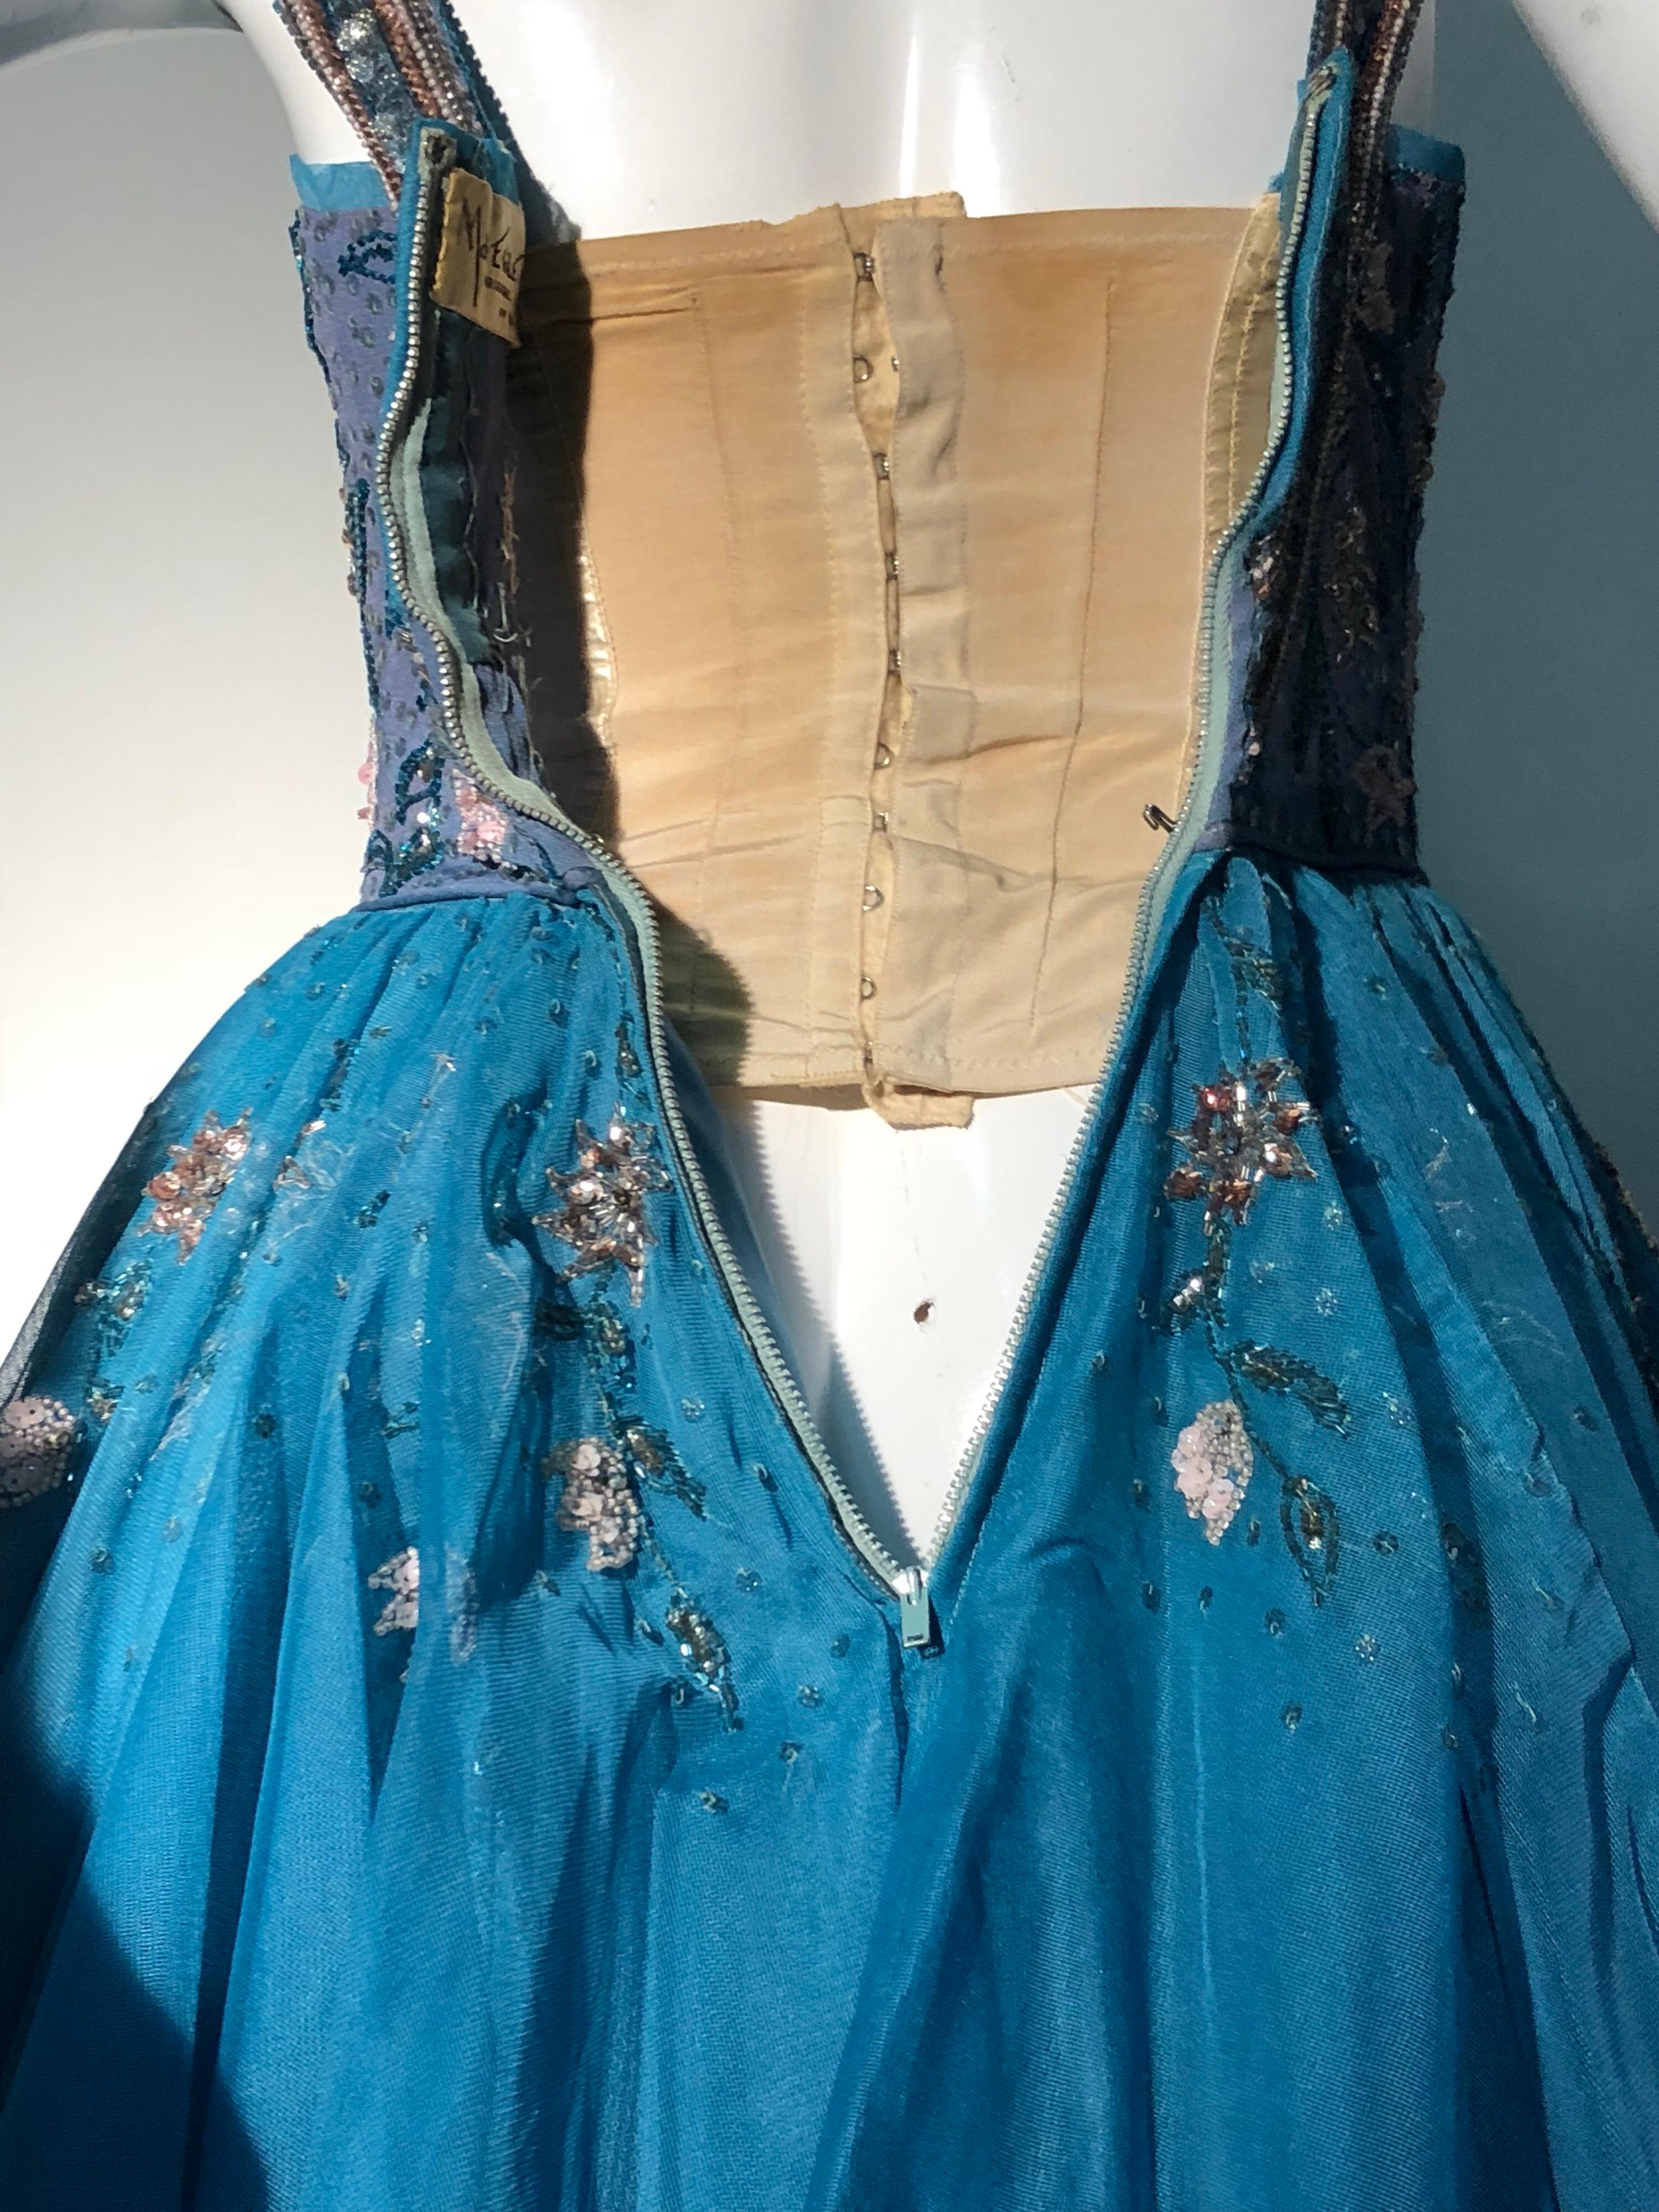 1950s MGM Mme. Etoile by Irene Sharaff Couture Ball Gown in Deep Teal Silk For Sale 10